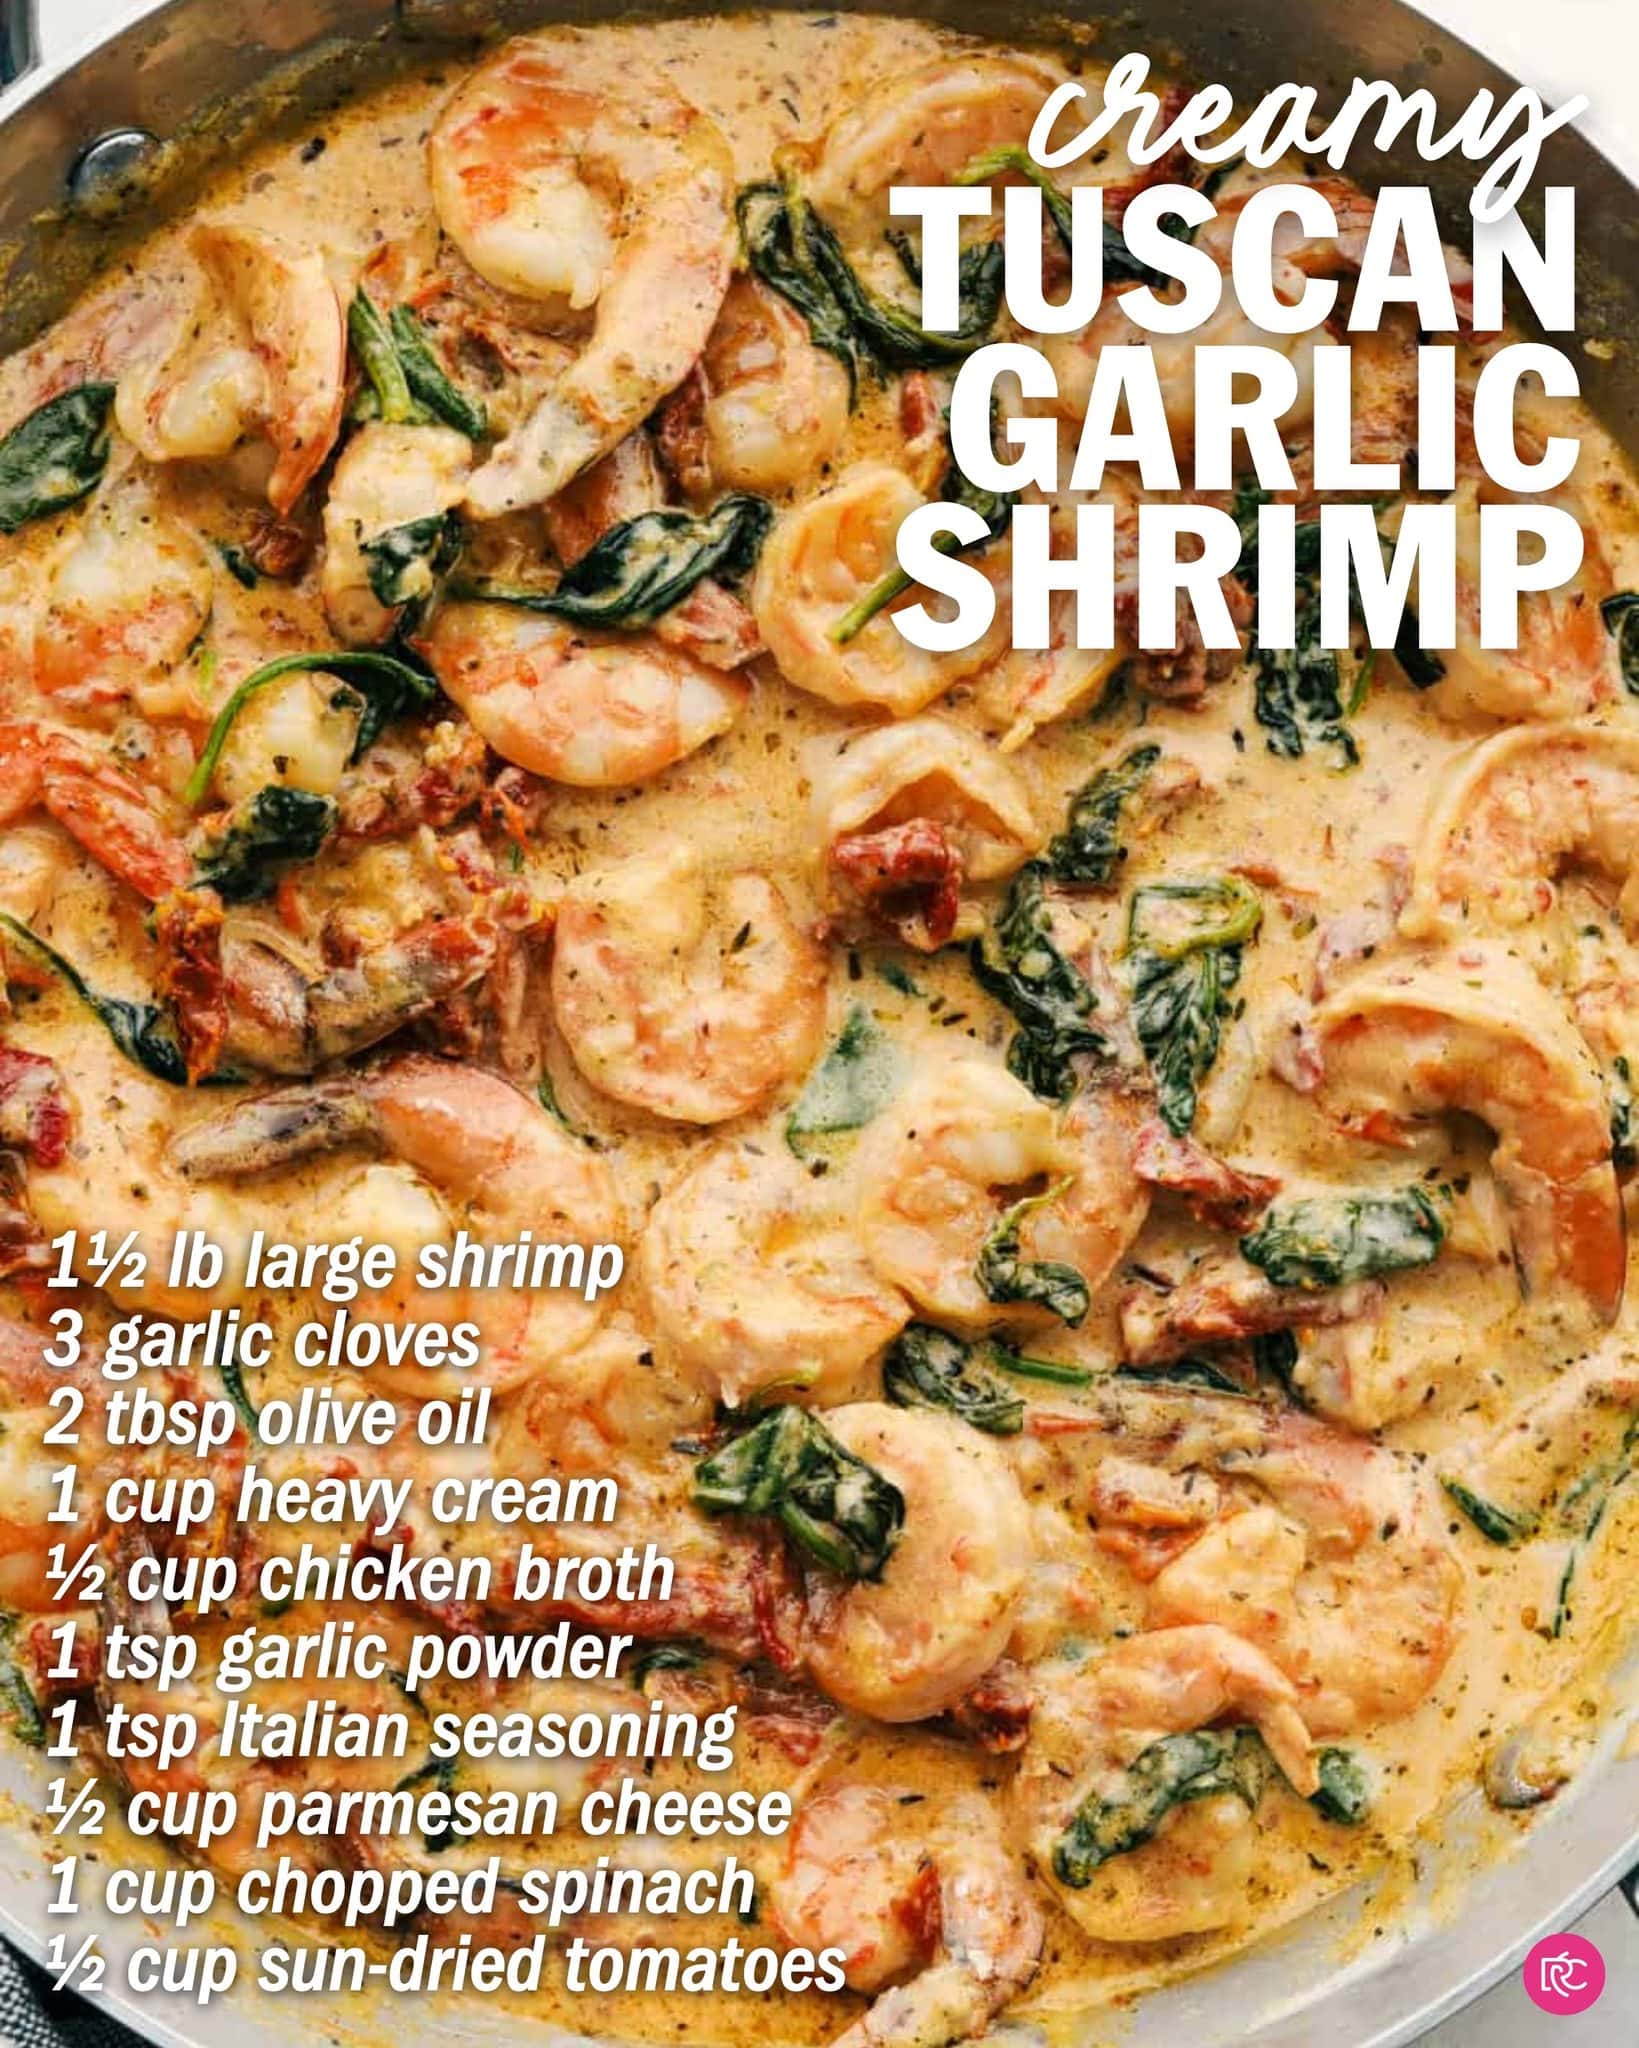 Image of creamy tuscan garlic shrimp in a skillet, perfect for easy dinner ideas. It's topped with spinach and sun-dried tomatoes. Ingredients listed include shrimp, garlic, heavy cream, and cheese